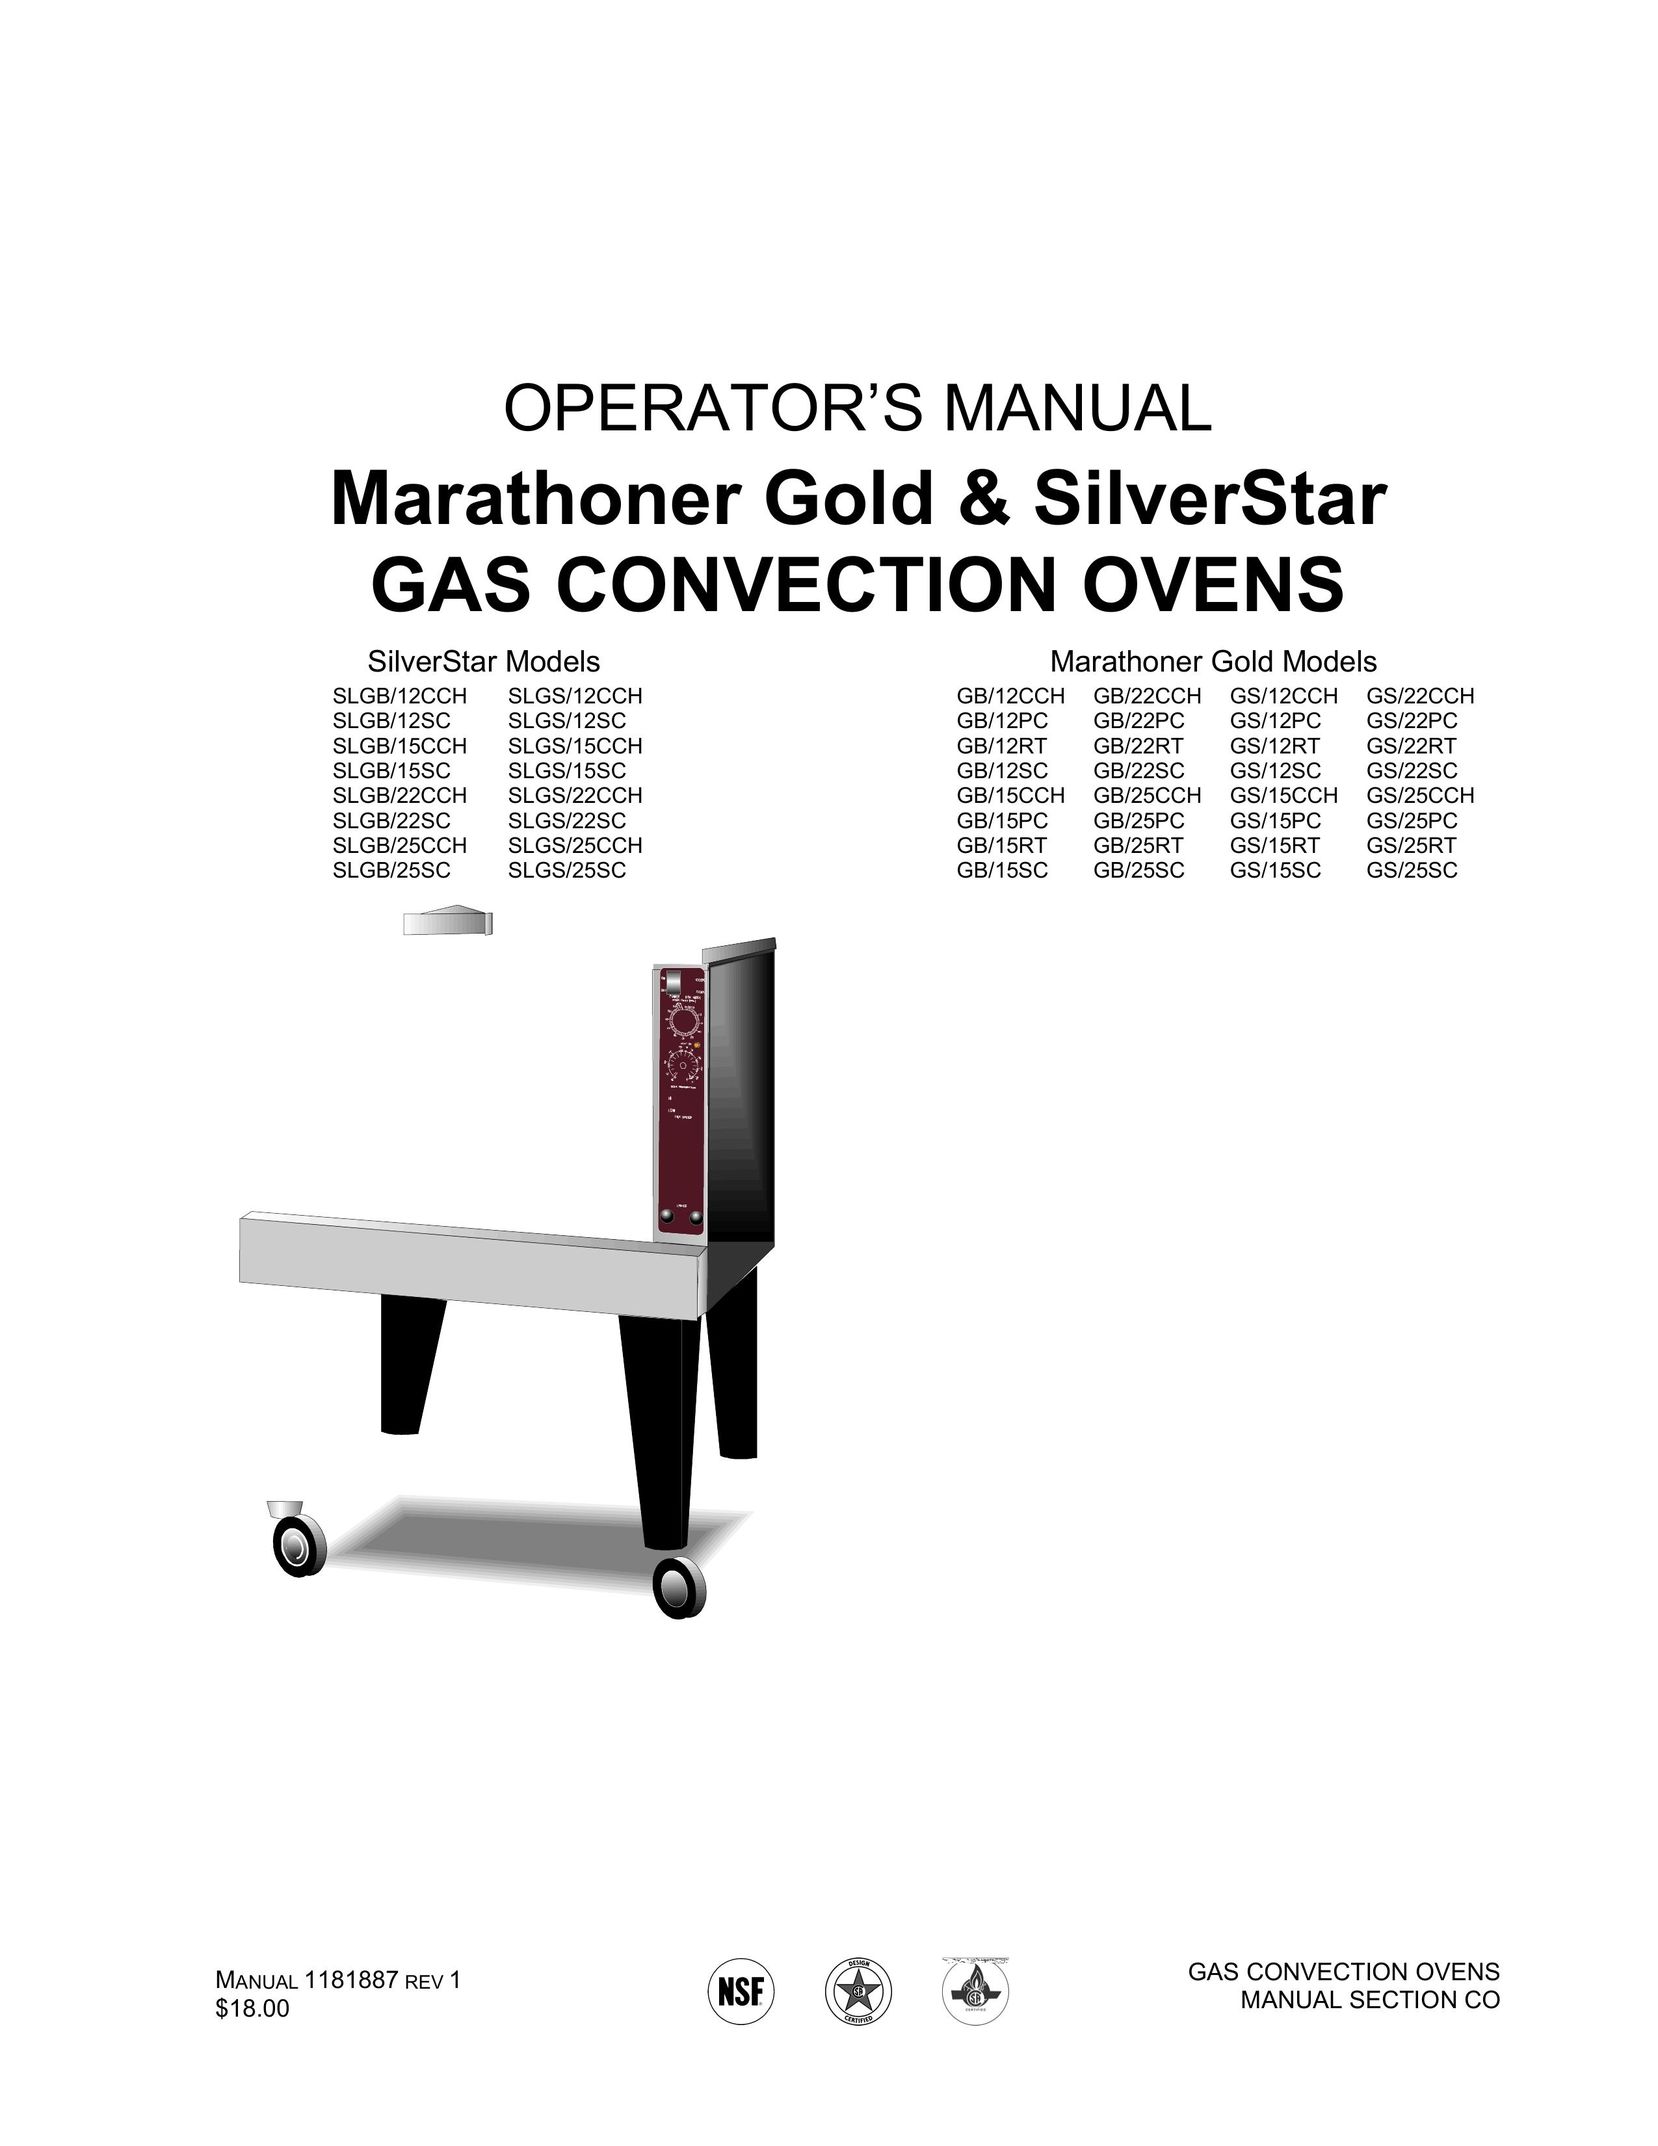 Southbend SLGB/22SC Oven User Manual